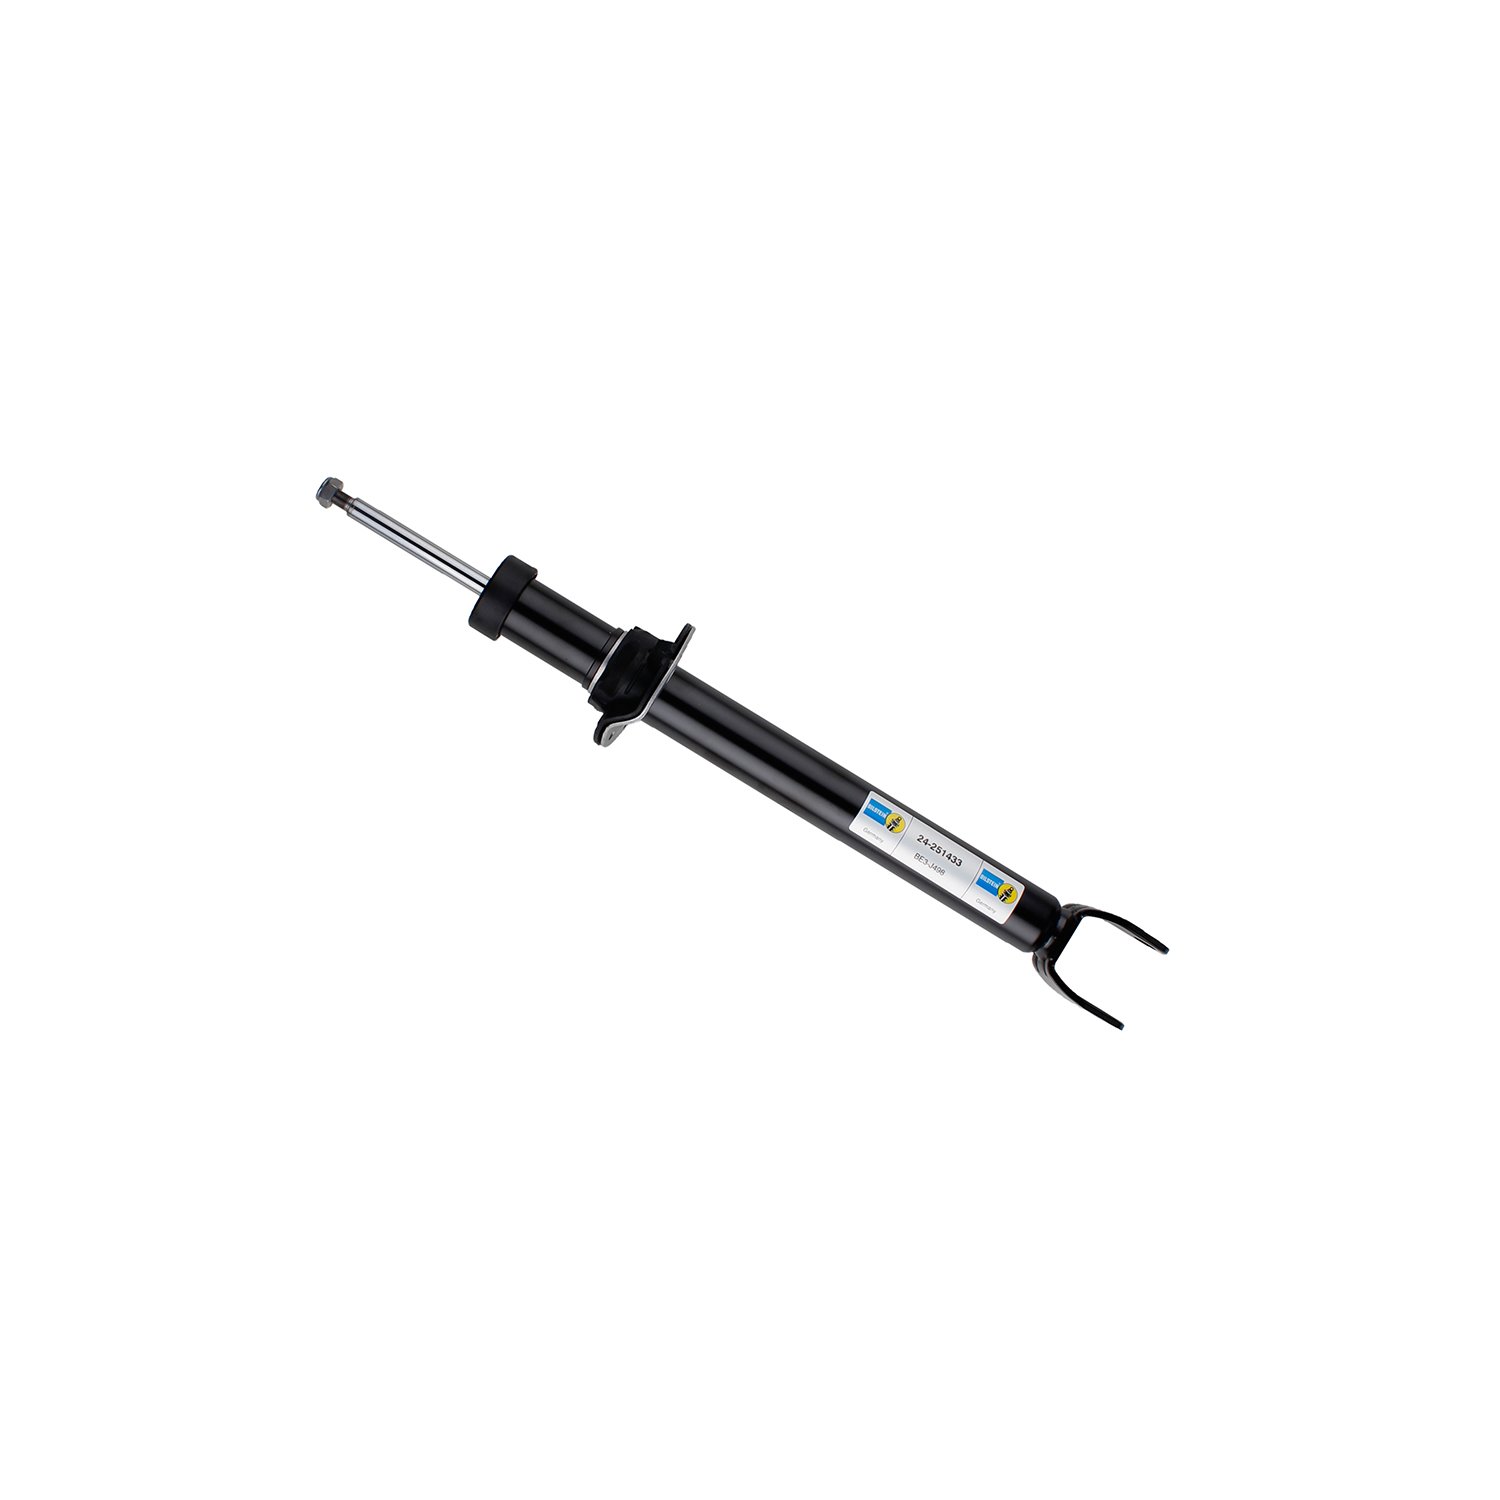 B4 OE Replacement (DampMatic) - Shock Absorber